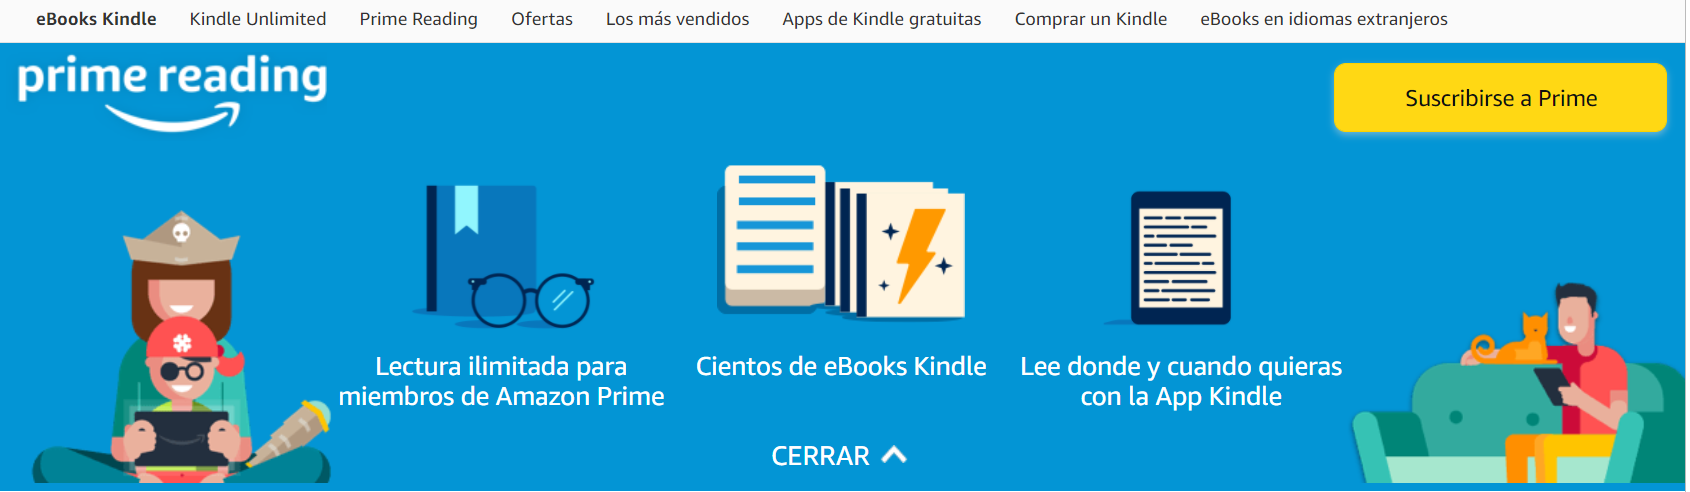 diferencia kindle unlimited prime reading